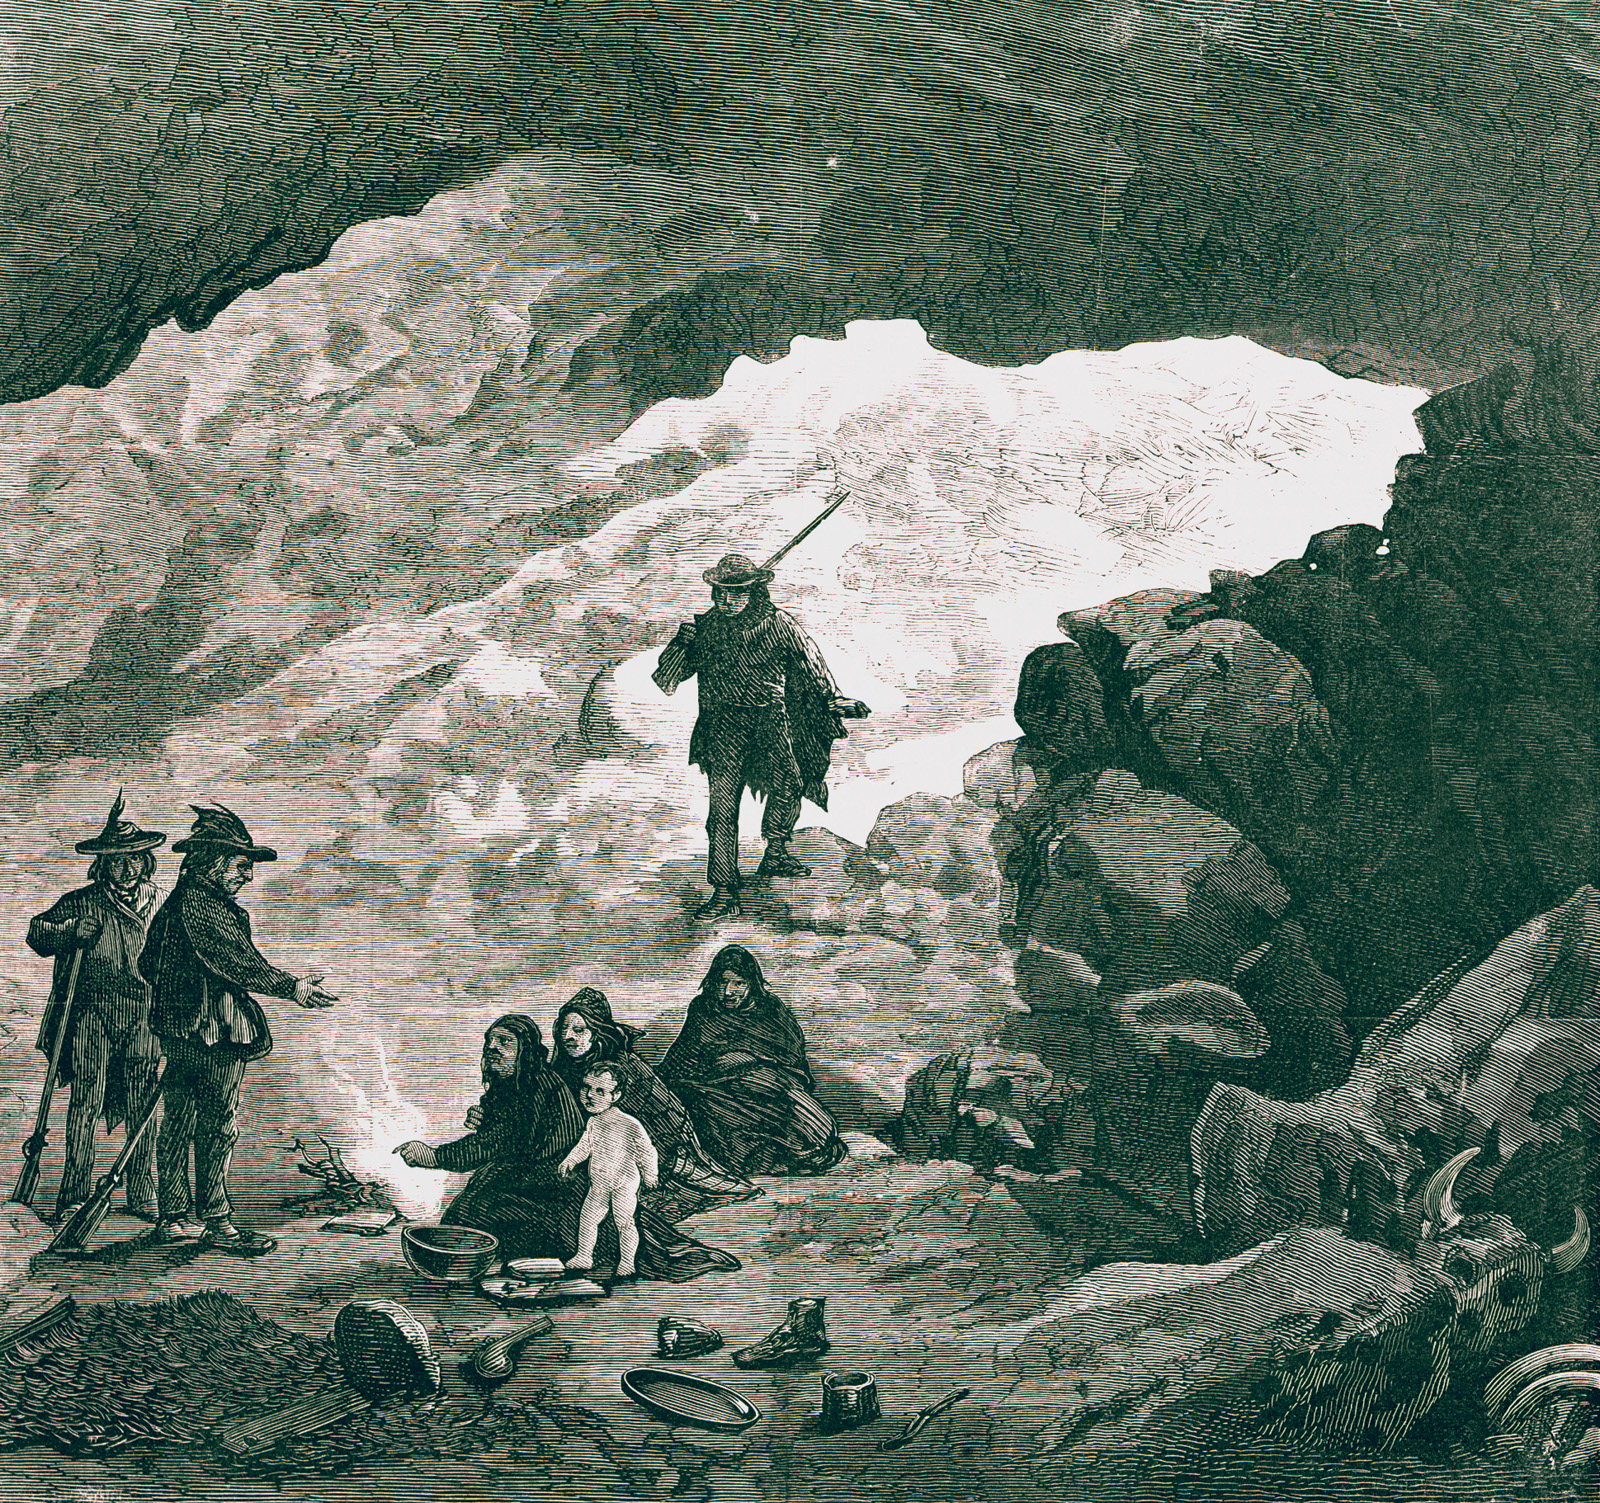 A sketch of Captain Jack’s cave in the lava beds from the London Illustrated News in 1873.